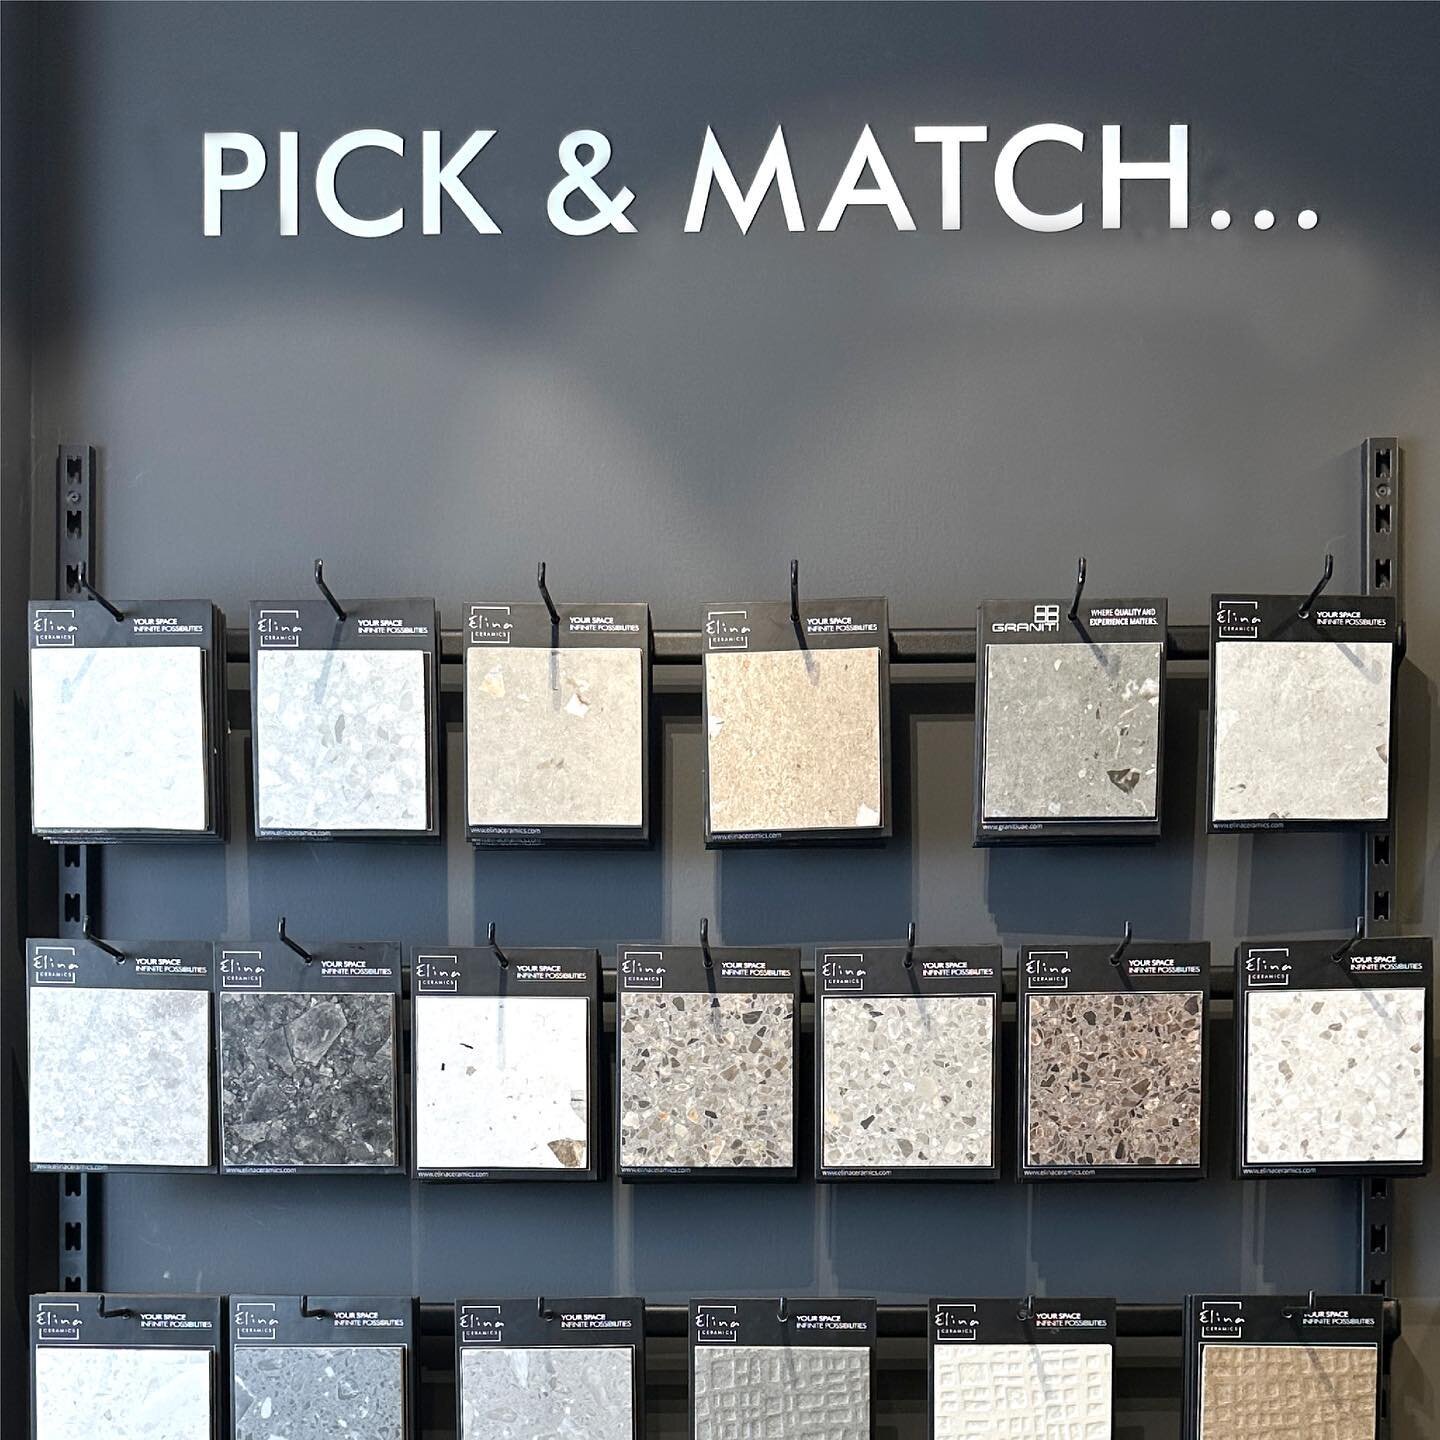 Pick and match the tiles that suit your style and achieve the perfect interior for your next project!

Visit Elina by Graniti and check out our collection range. ✨

#dubaiinteriors #dubailife #uae #uaeinteriors #dubaidesigners #interiordesign